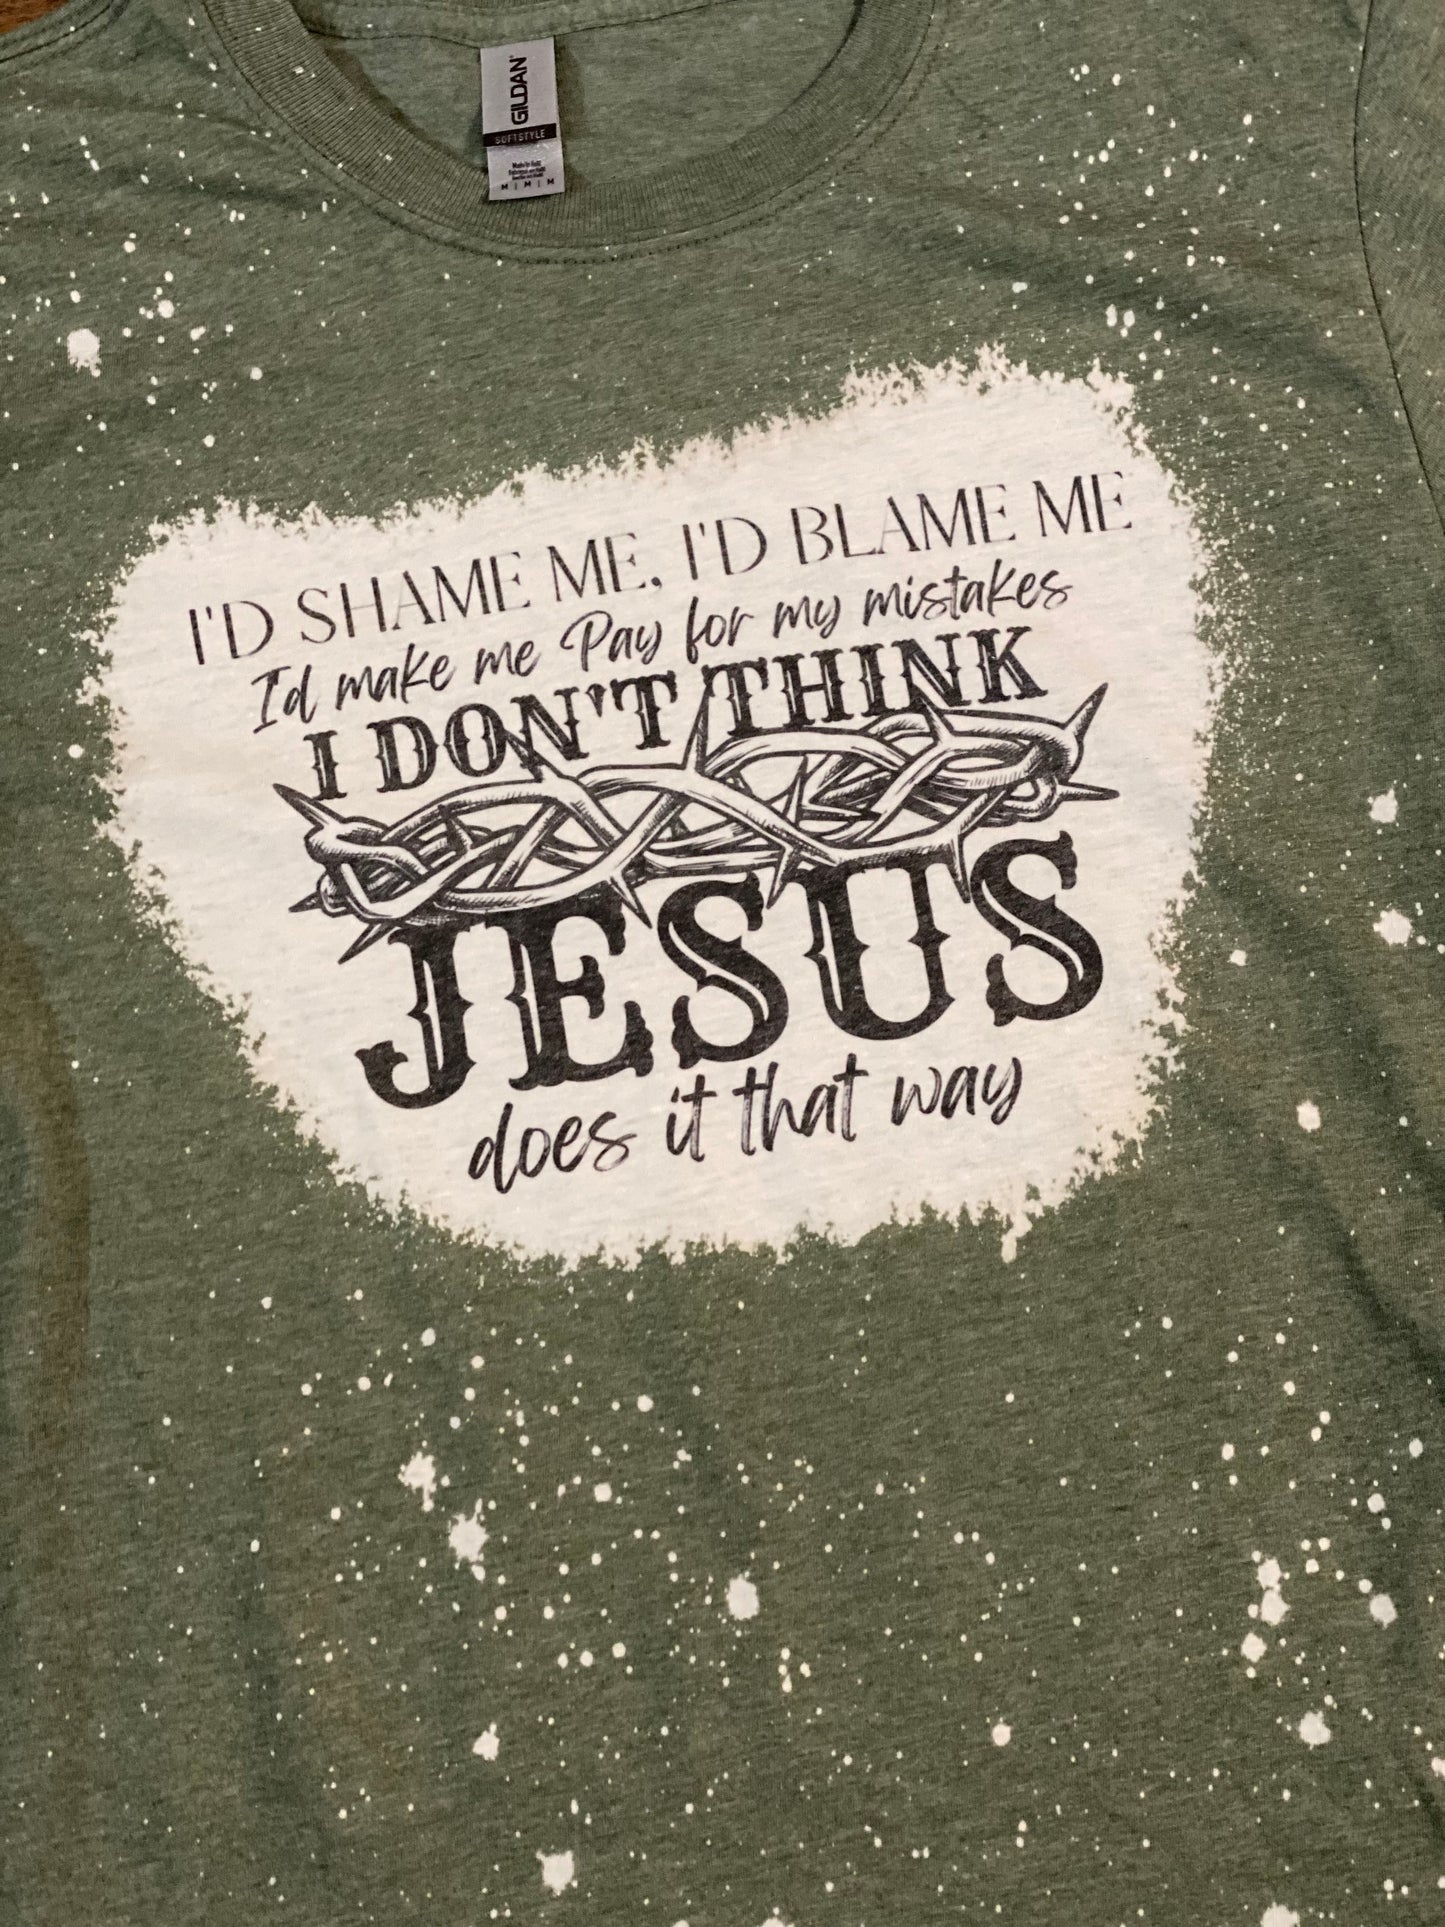 Bleached Tee I Don’t Think Jesus Does it That Way